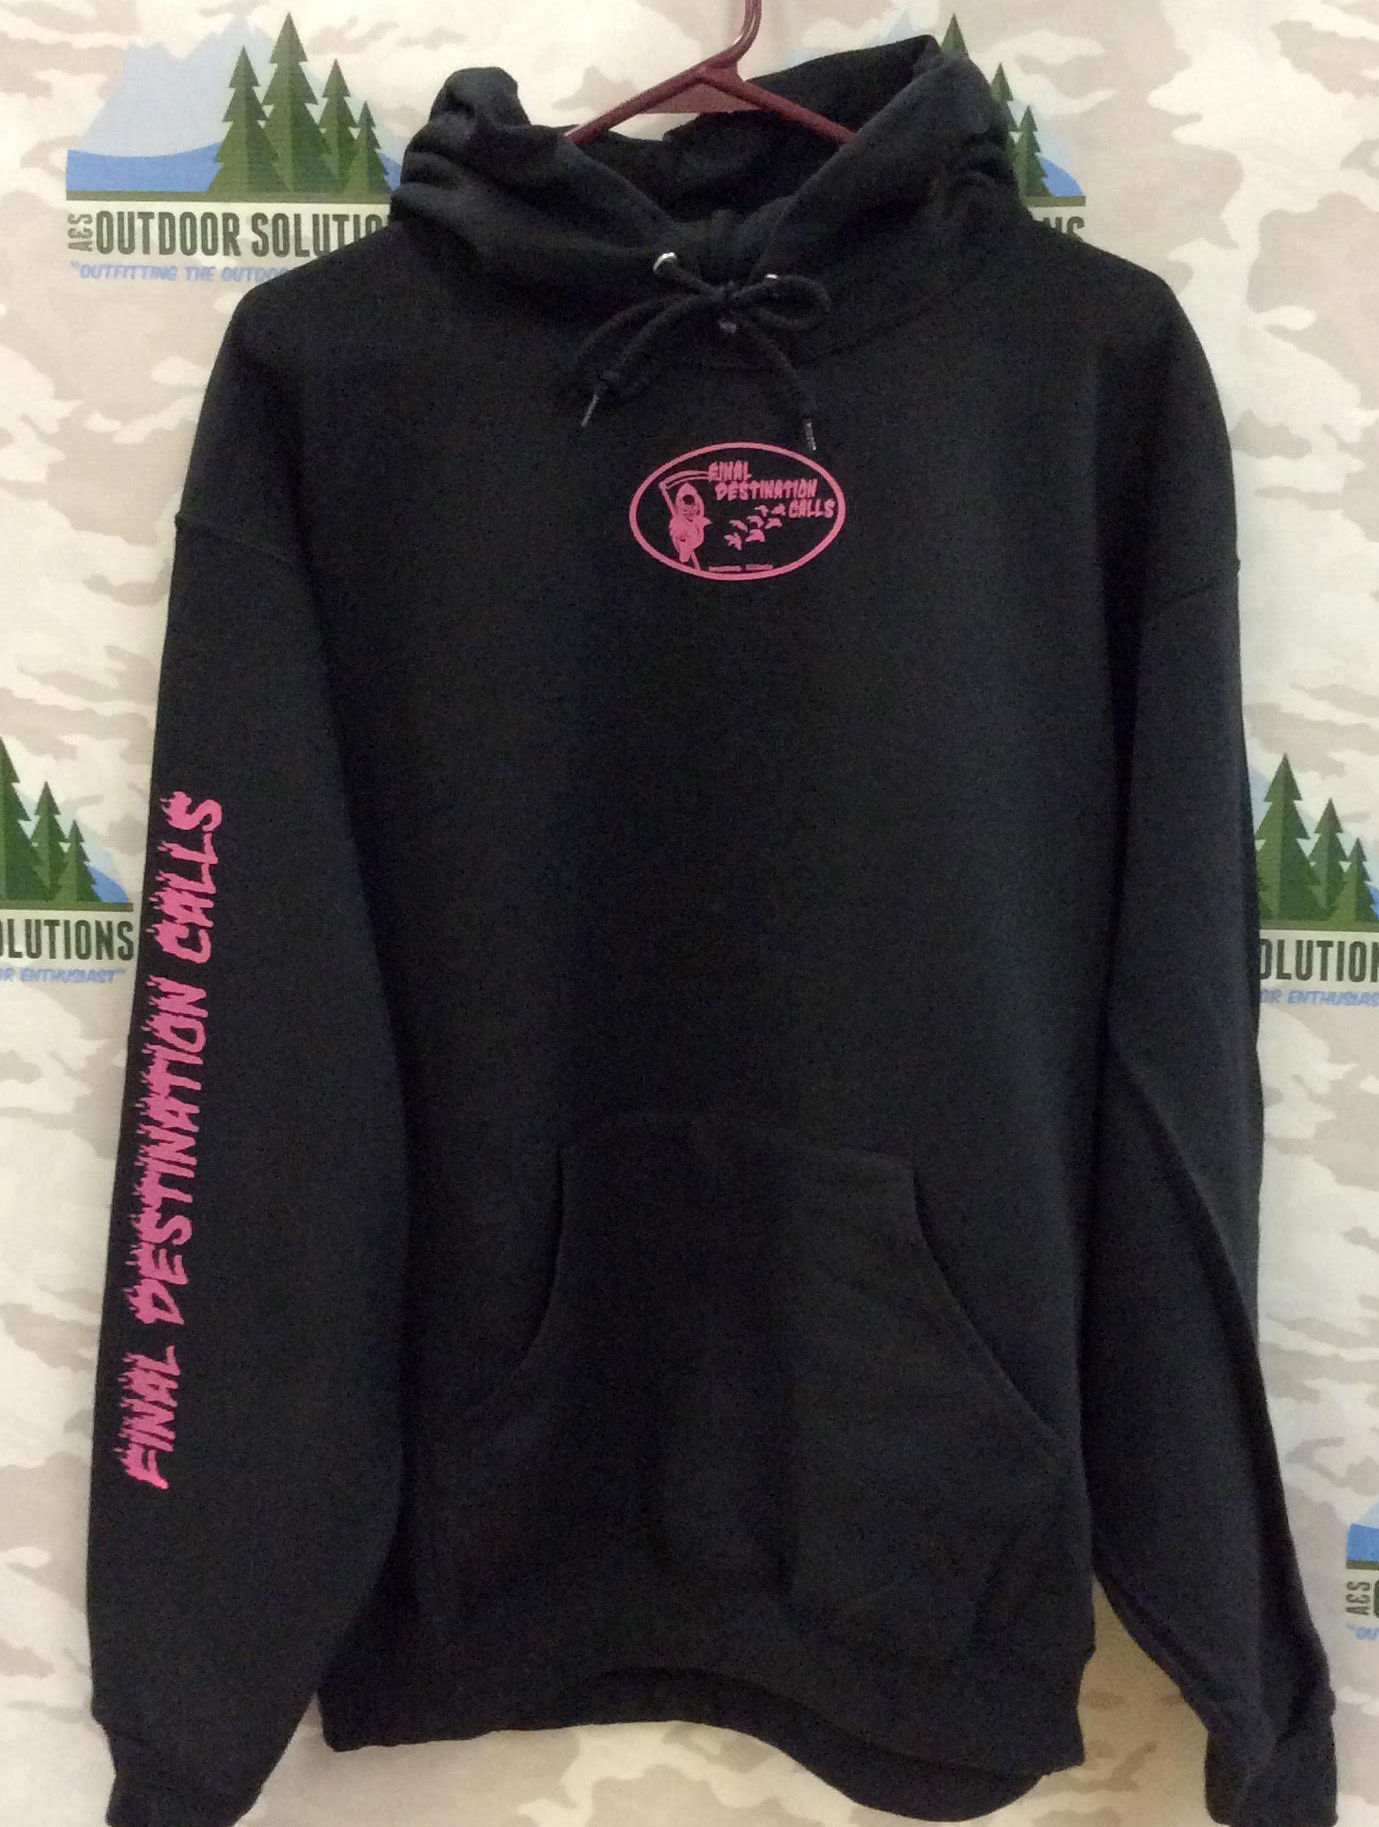 Black Hooded Sweatshirt with Hot Pink Logo from Final Destination Calls